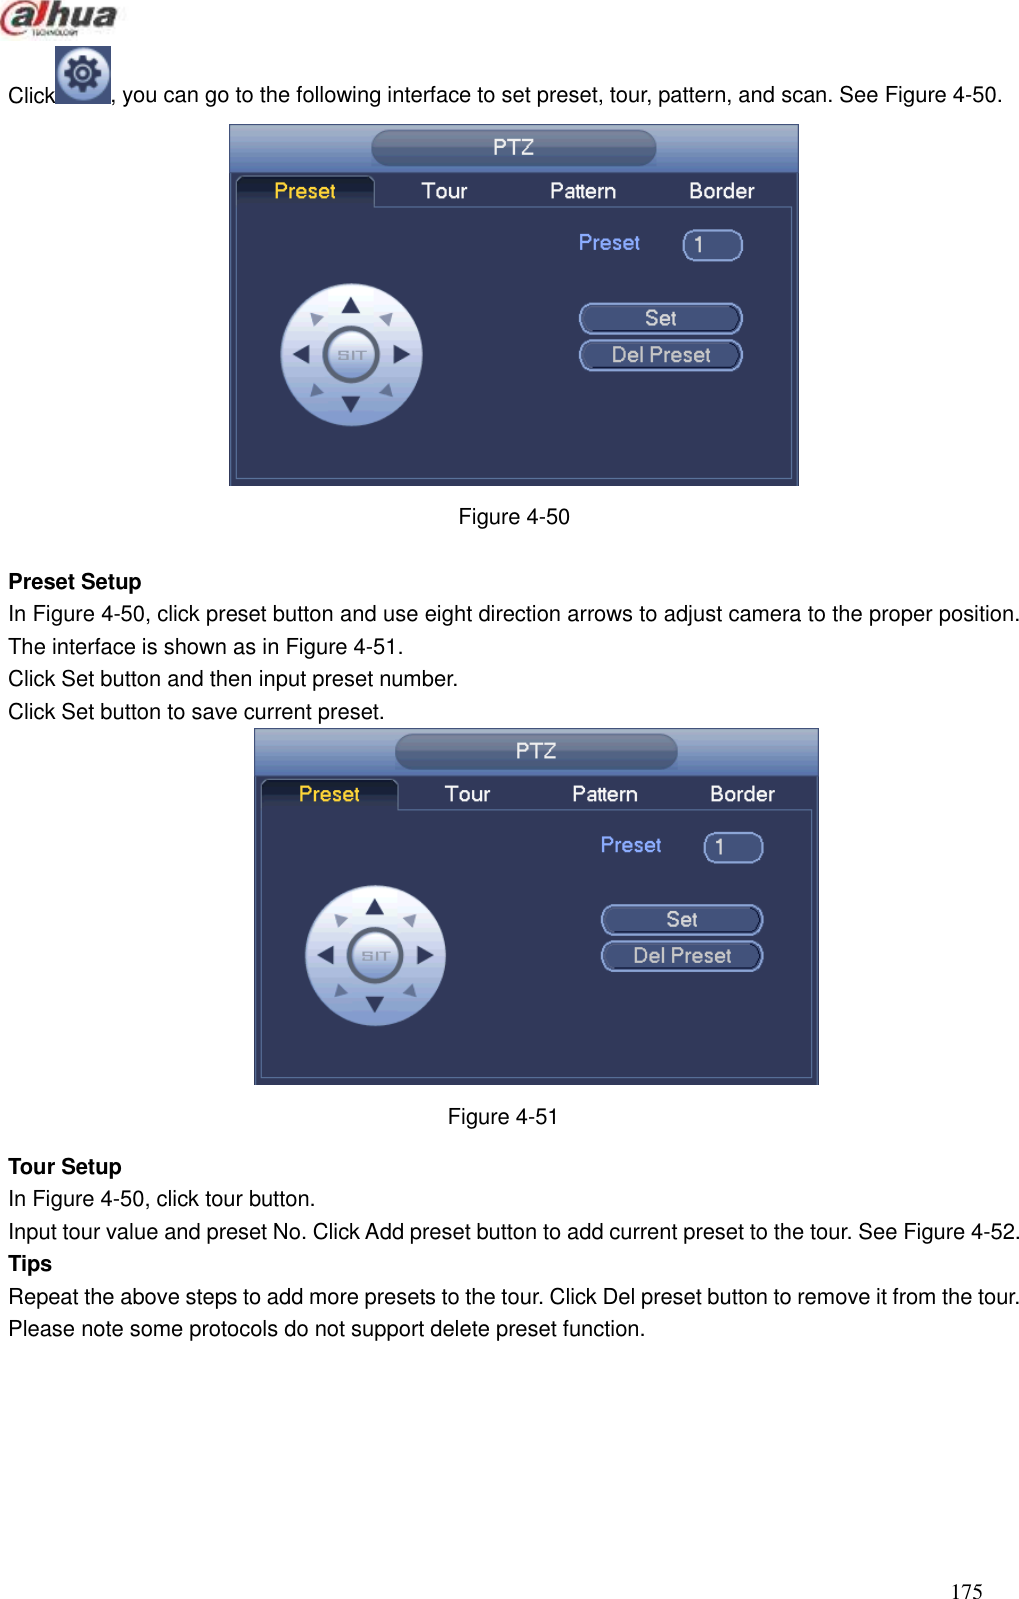  175  Click , you can go to the following interface to set preset, tour, pattern, and scan. See Figure 4-50.  Figure 4-50  Preset Setup In Figure 4-50, click preset button and use eight direction arrows to adjust camera to the proper position. The interface is shown as in Figure 4-51. Click Set button and then input preset number.   Click Set button to save current preset.    Figure 4-51 Tour Setup   In Figure 4-50, click tour button. Input tour value and preset No. Click Add preset button to add current preset to the tour. See Figure 4-52. Tips Repeat the above steps to add more presets to the tour. Click Del preset button to remove it from the tour. Please note some protocols do not support delete preset function.     